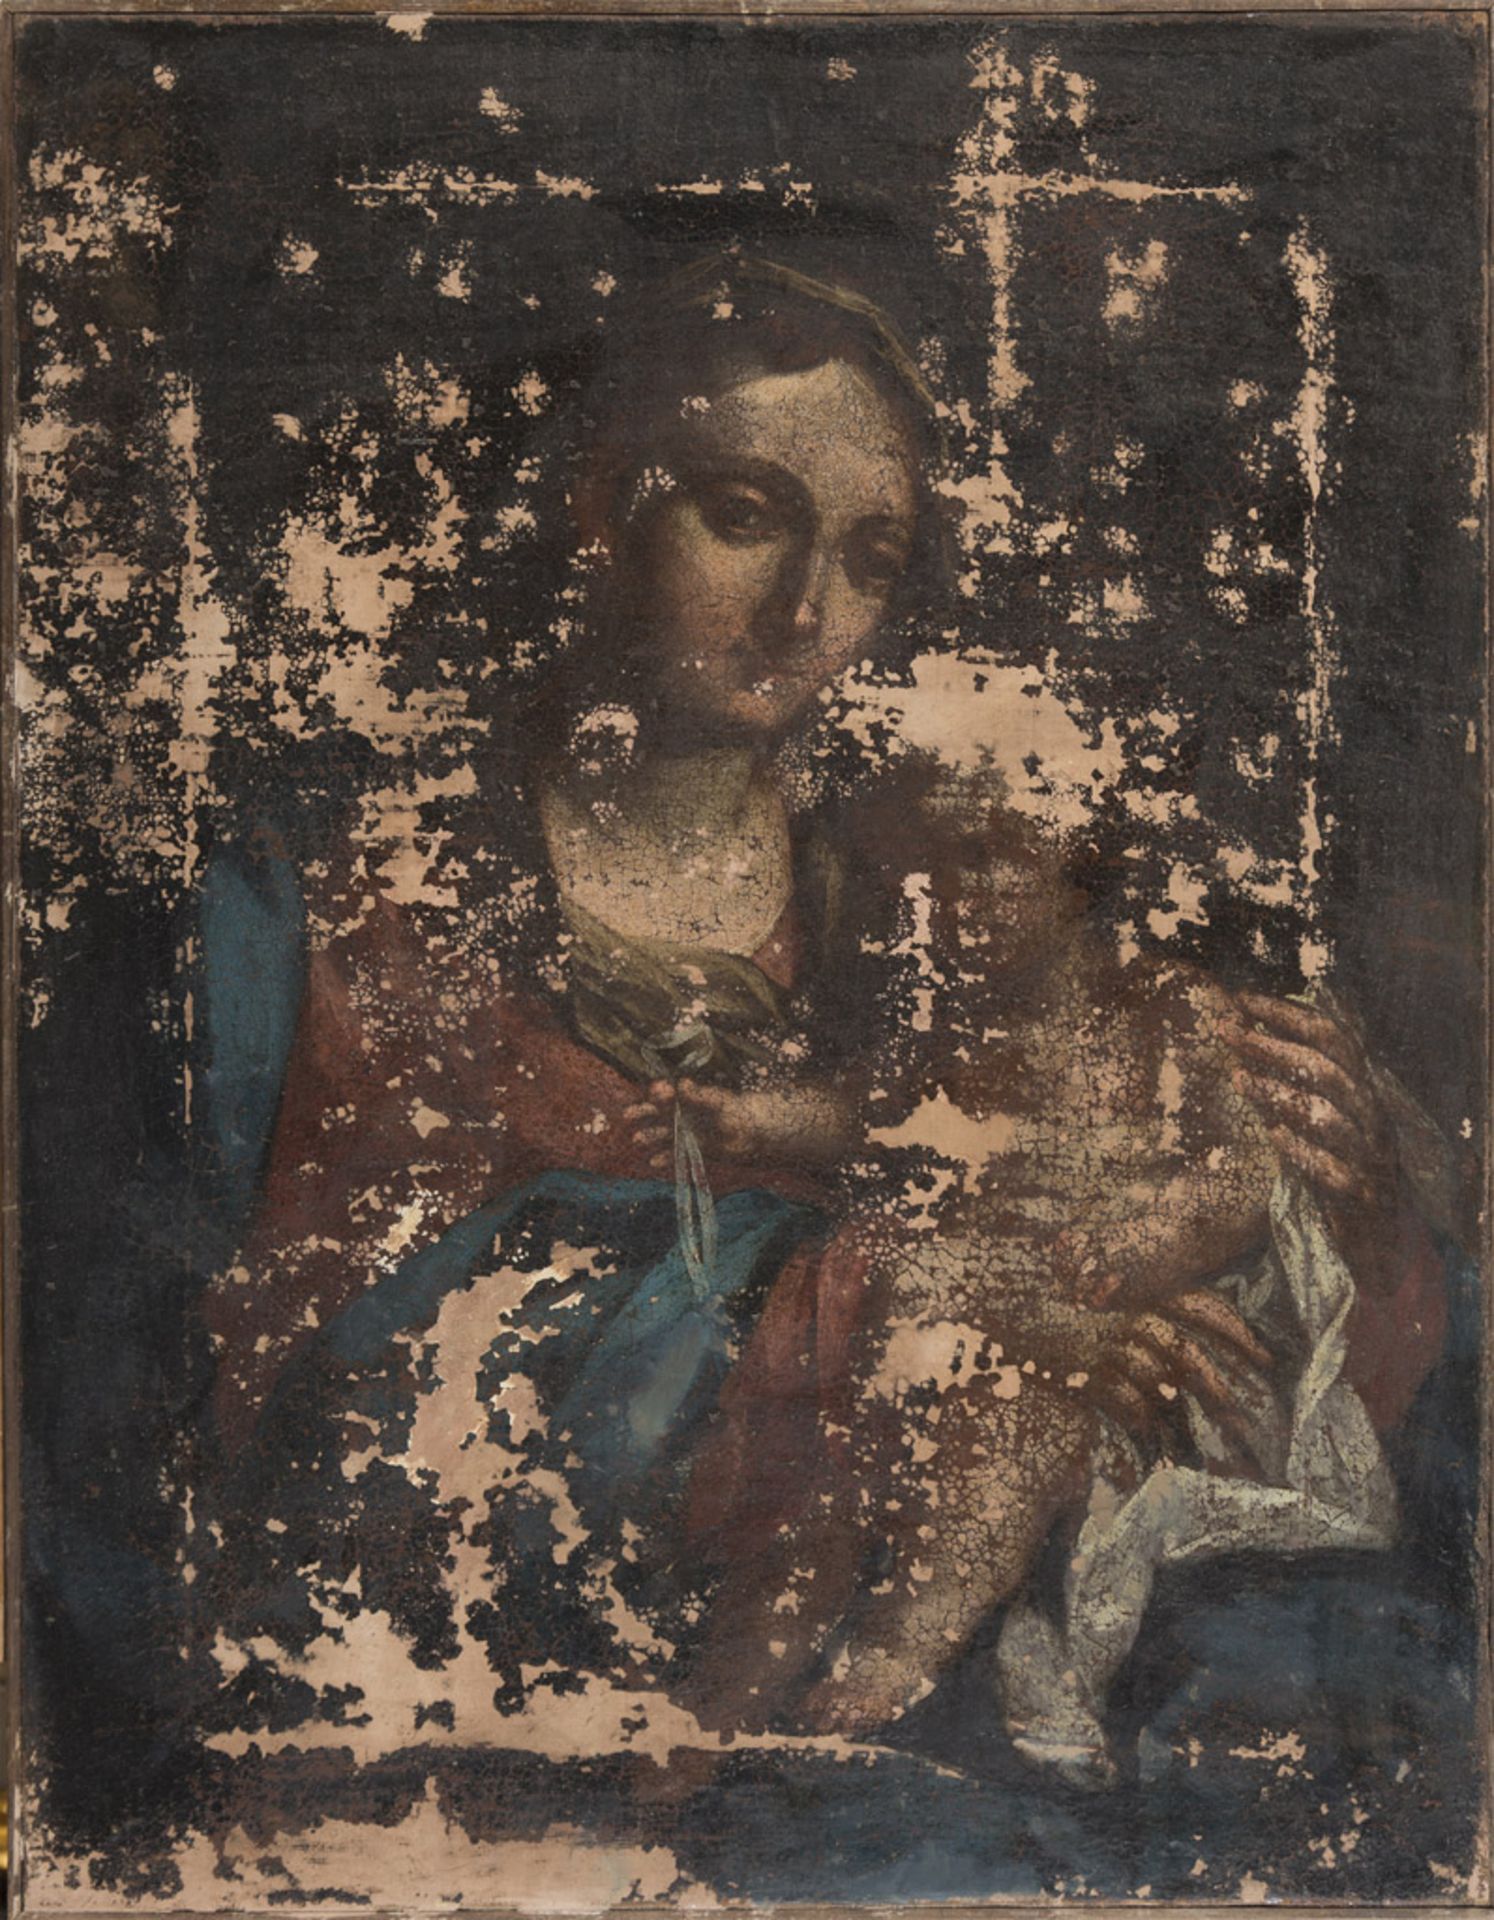 BOLOGNESE PAINTER, 17TH CENTURY VIRGIN AND CHILD Oil on canvas, cm. 64 x 49,5 PROVENANCE